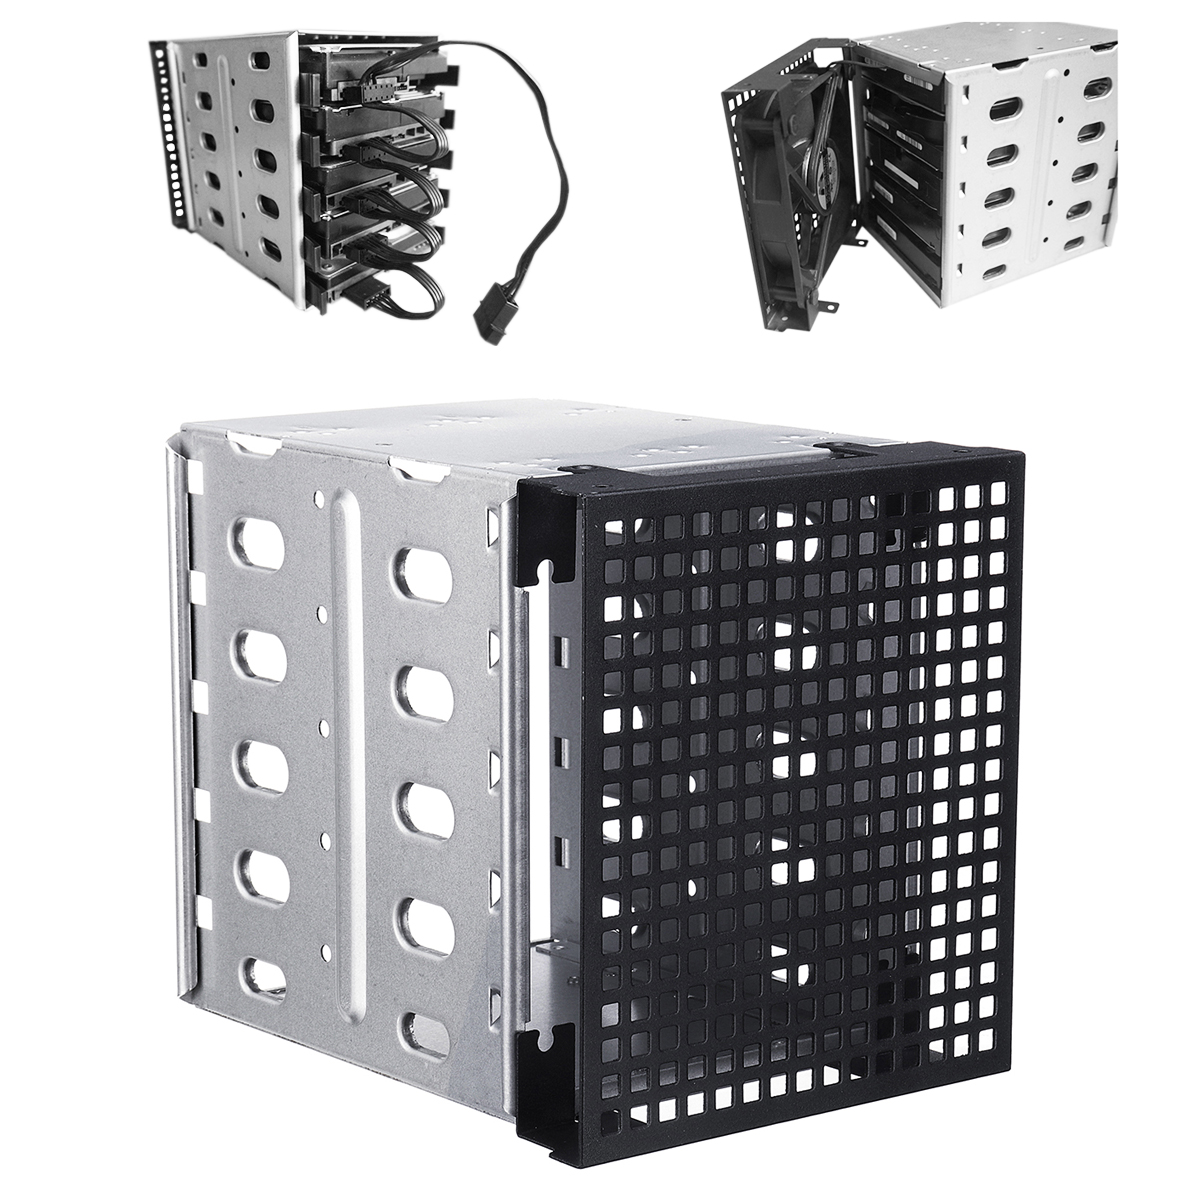 

5.25" to 5x 3.5" SATA SAS HDD Cage Rack Hard Drive Tray Caddy Converter with Fan Space